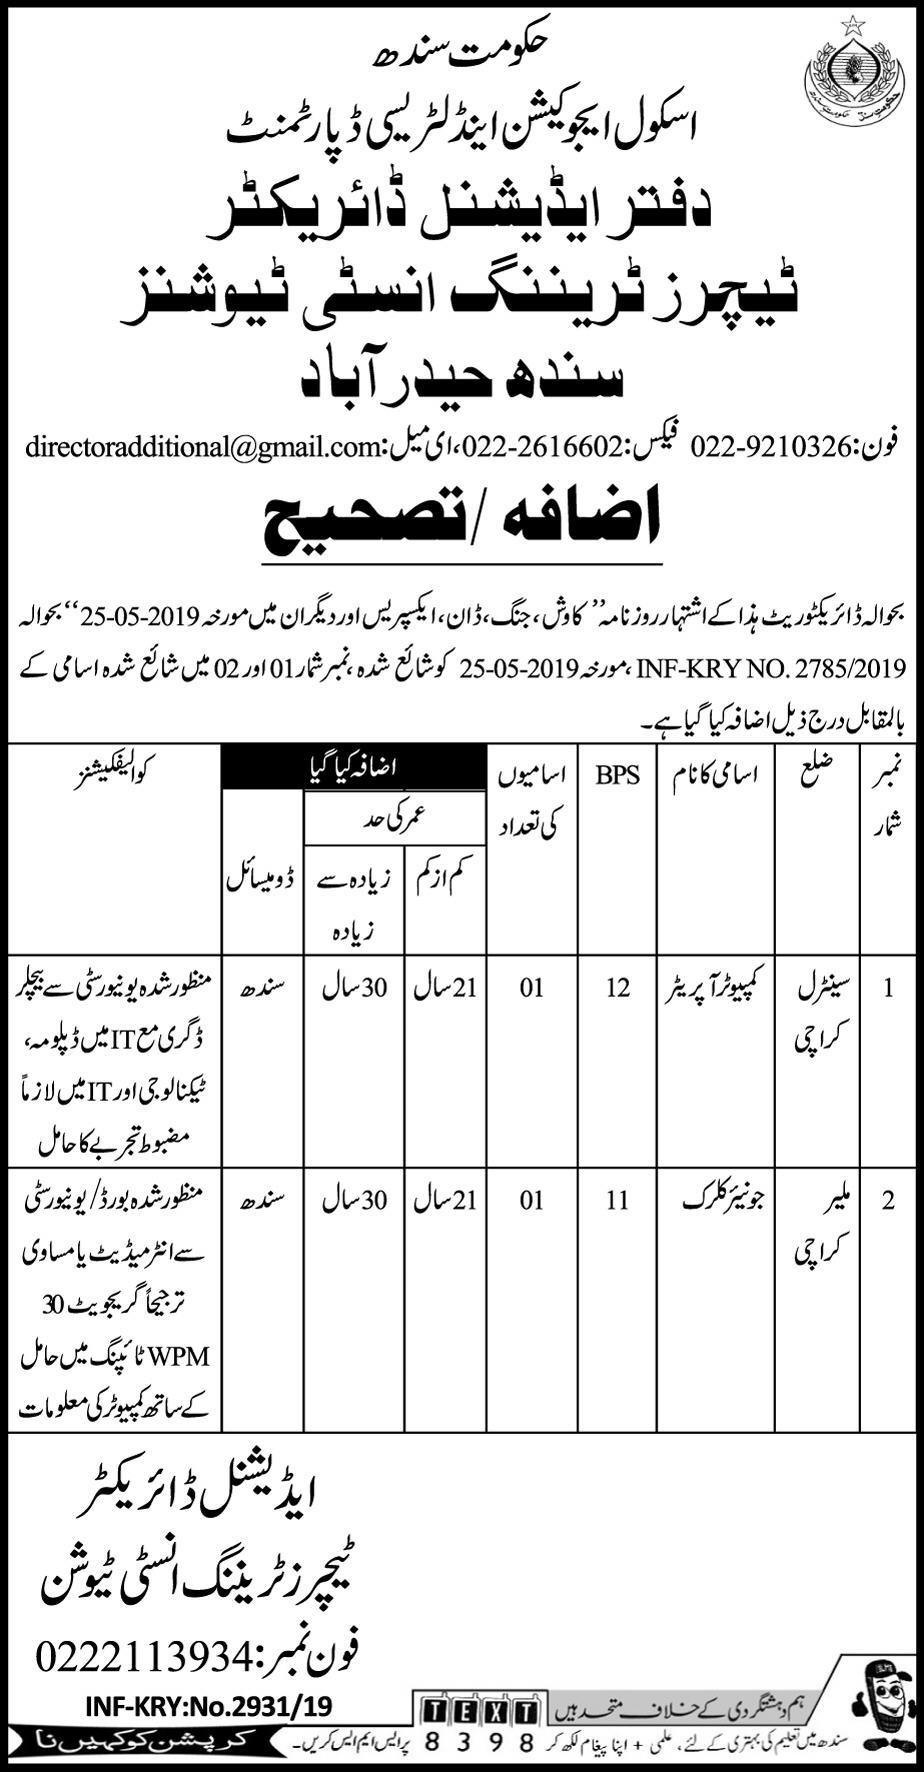 Get a Latest Jobs In Education Department Sindh 2019